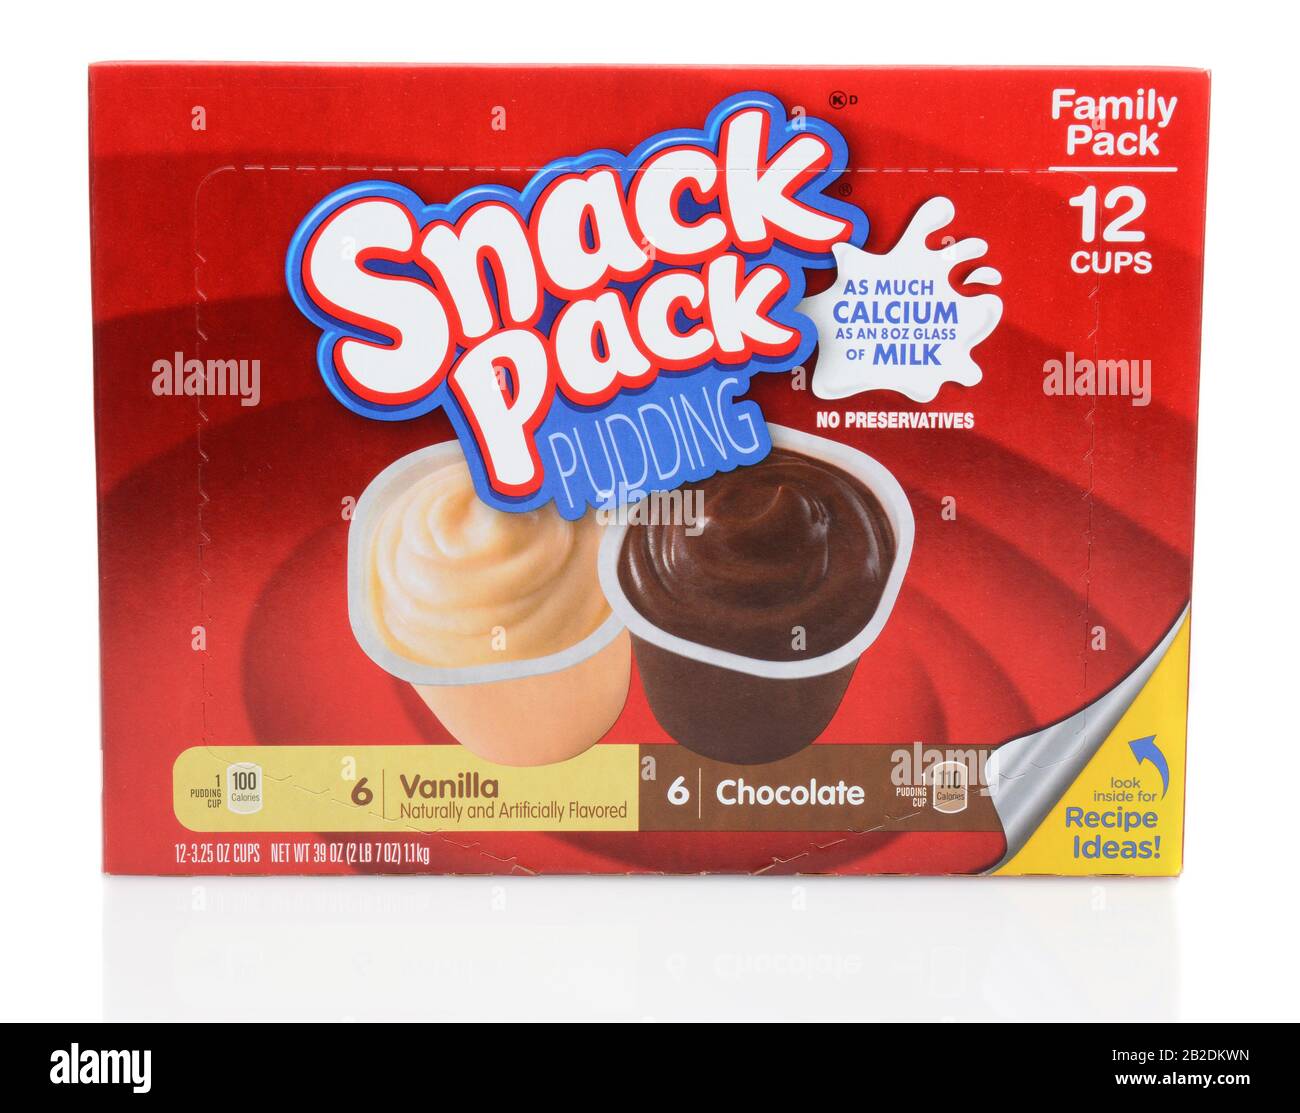 IRVINE, CA - SEPTEMBER 12, 2014: A box of Snack Pack Pudding. Snack Pack was introduced in 1968 as a shelf-stable pudding in single-serve containers. Stock Photo